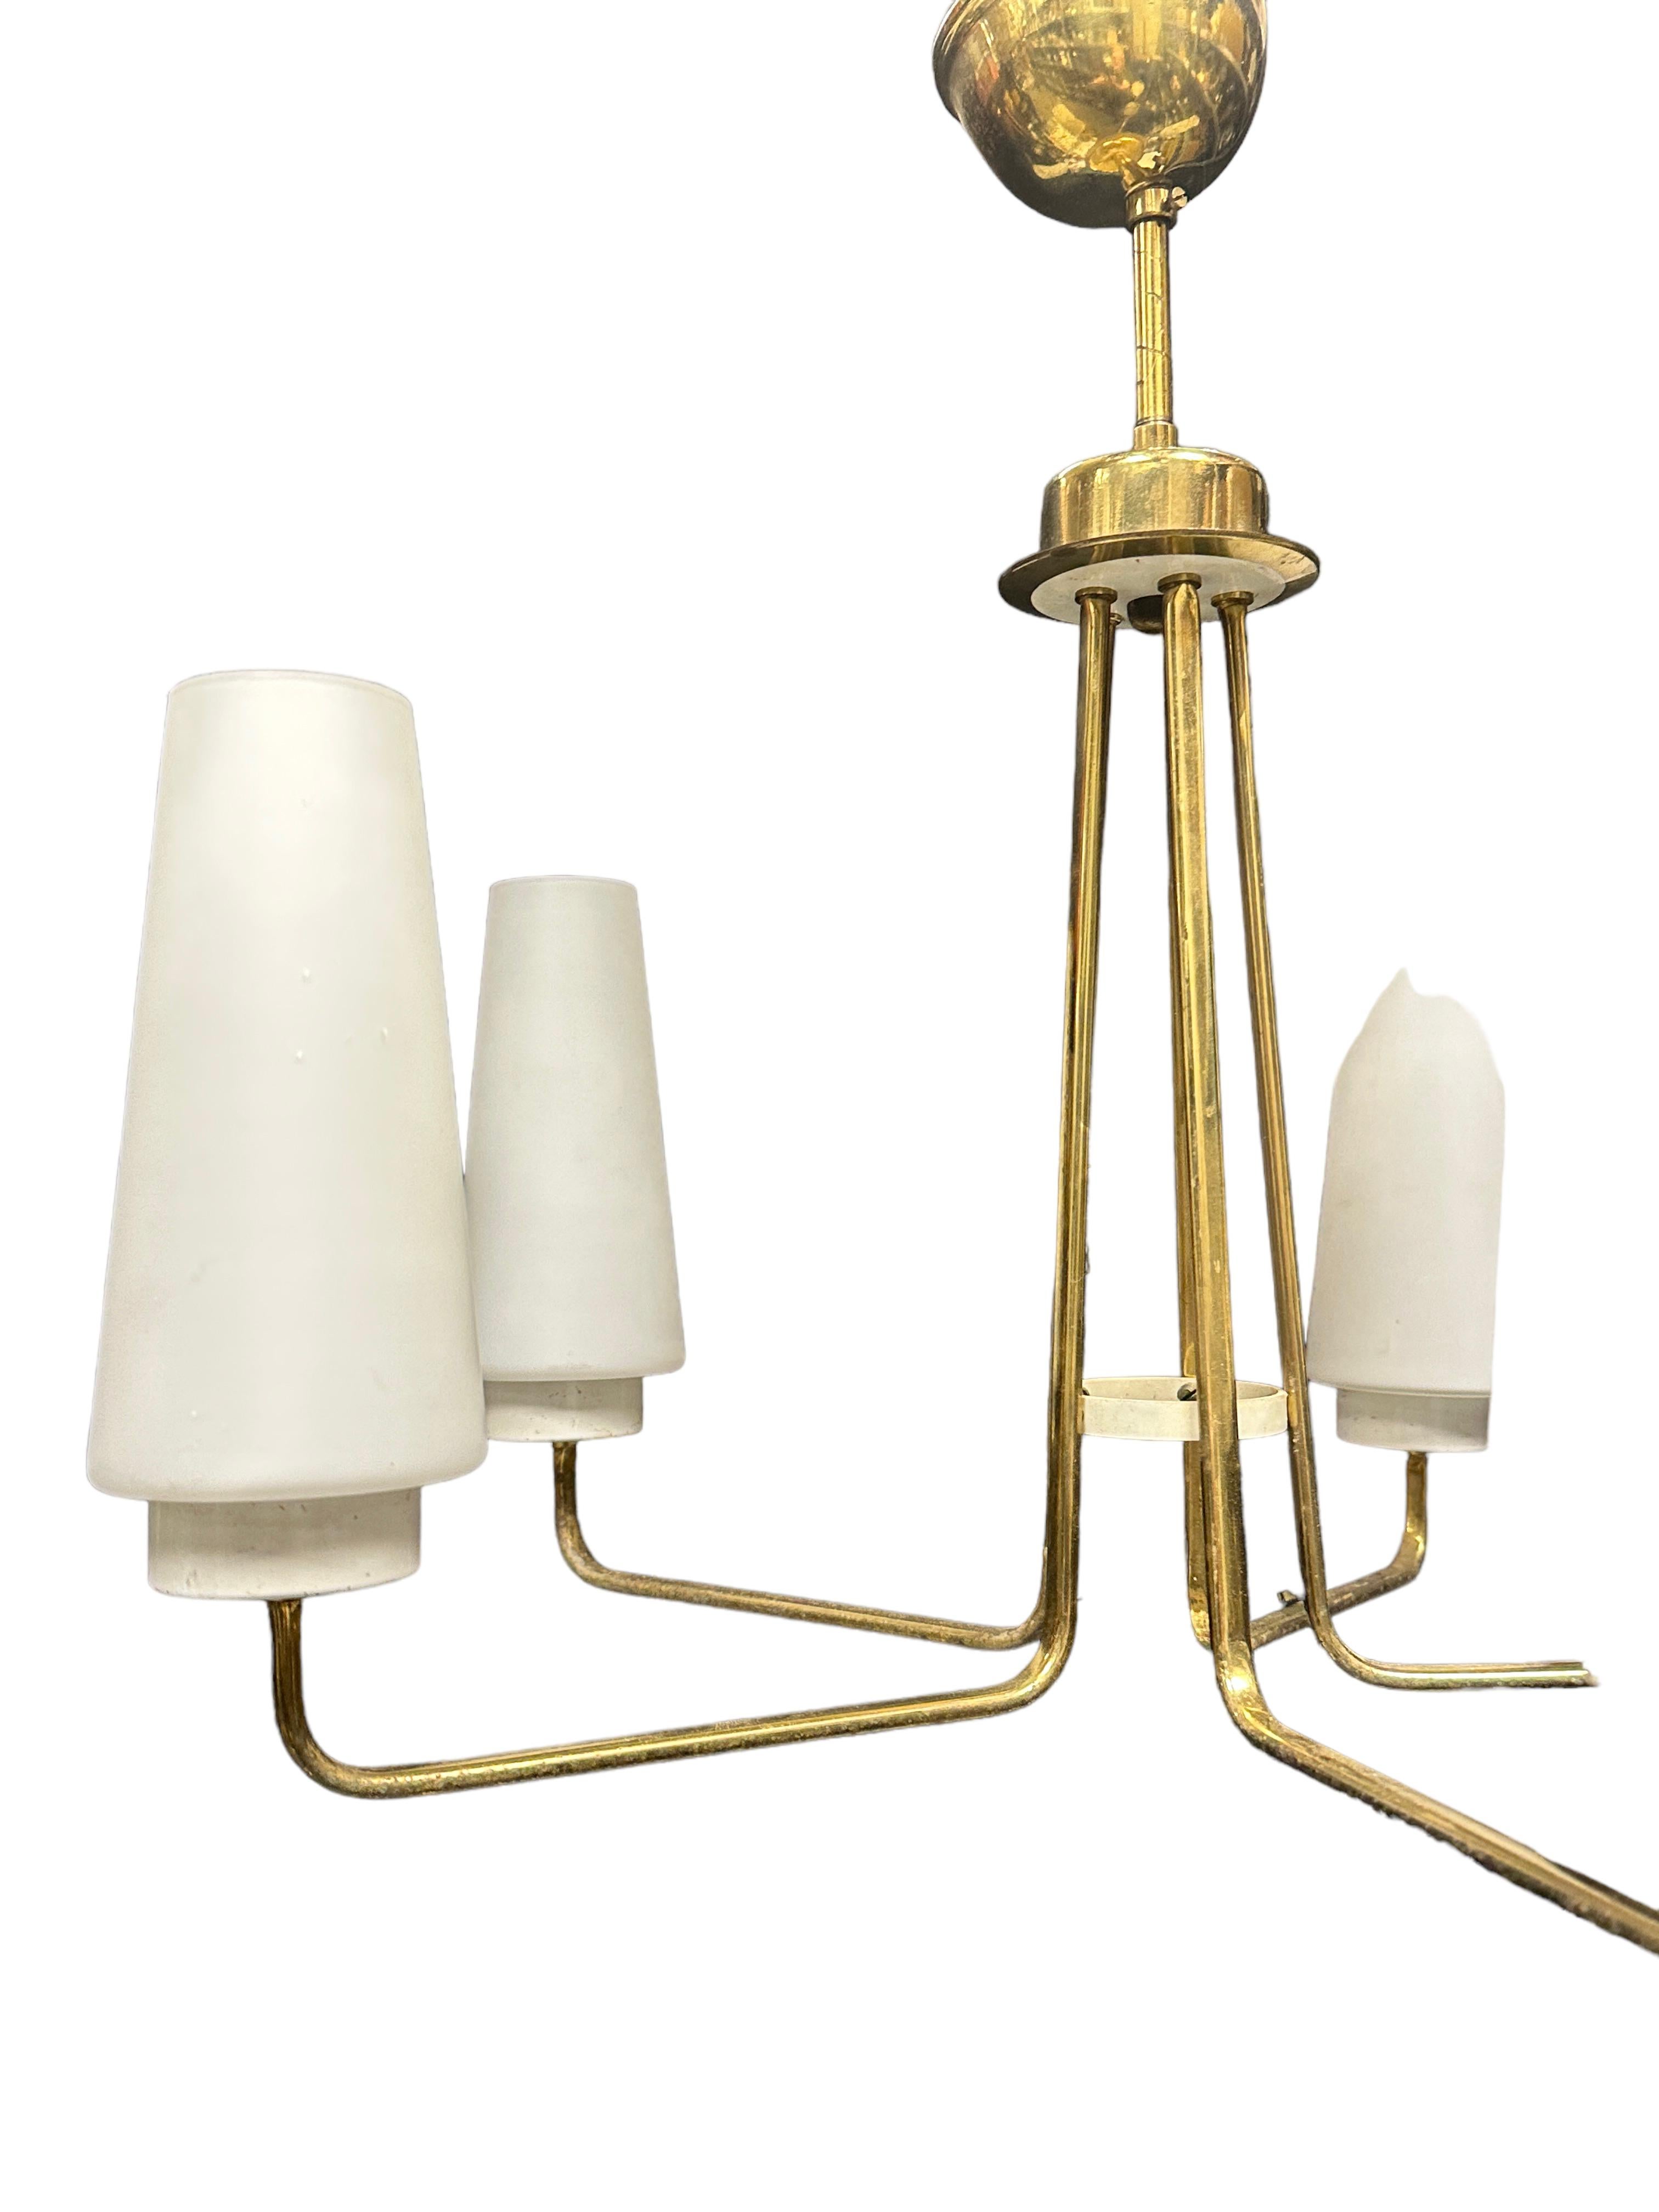 Lacquered Beautiful Five Light Brass & Glass Stilnovo Chandelier Vintage Italy, 1950s